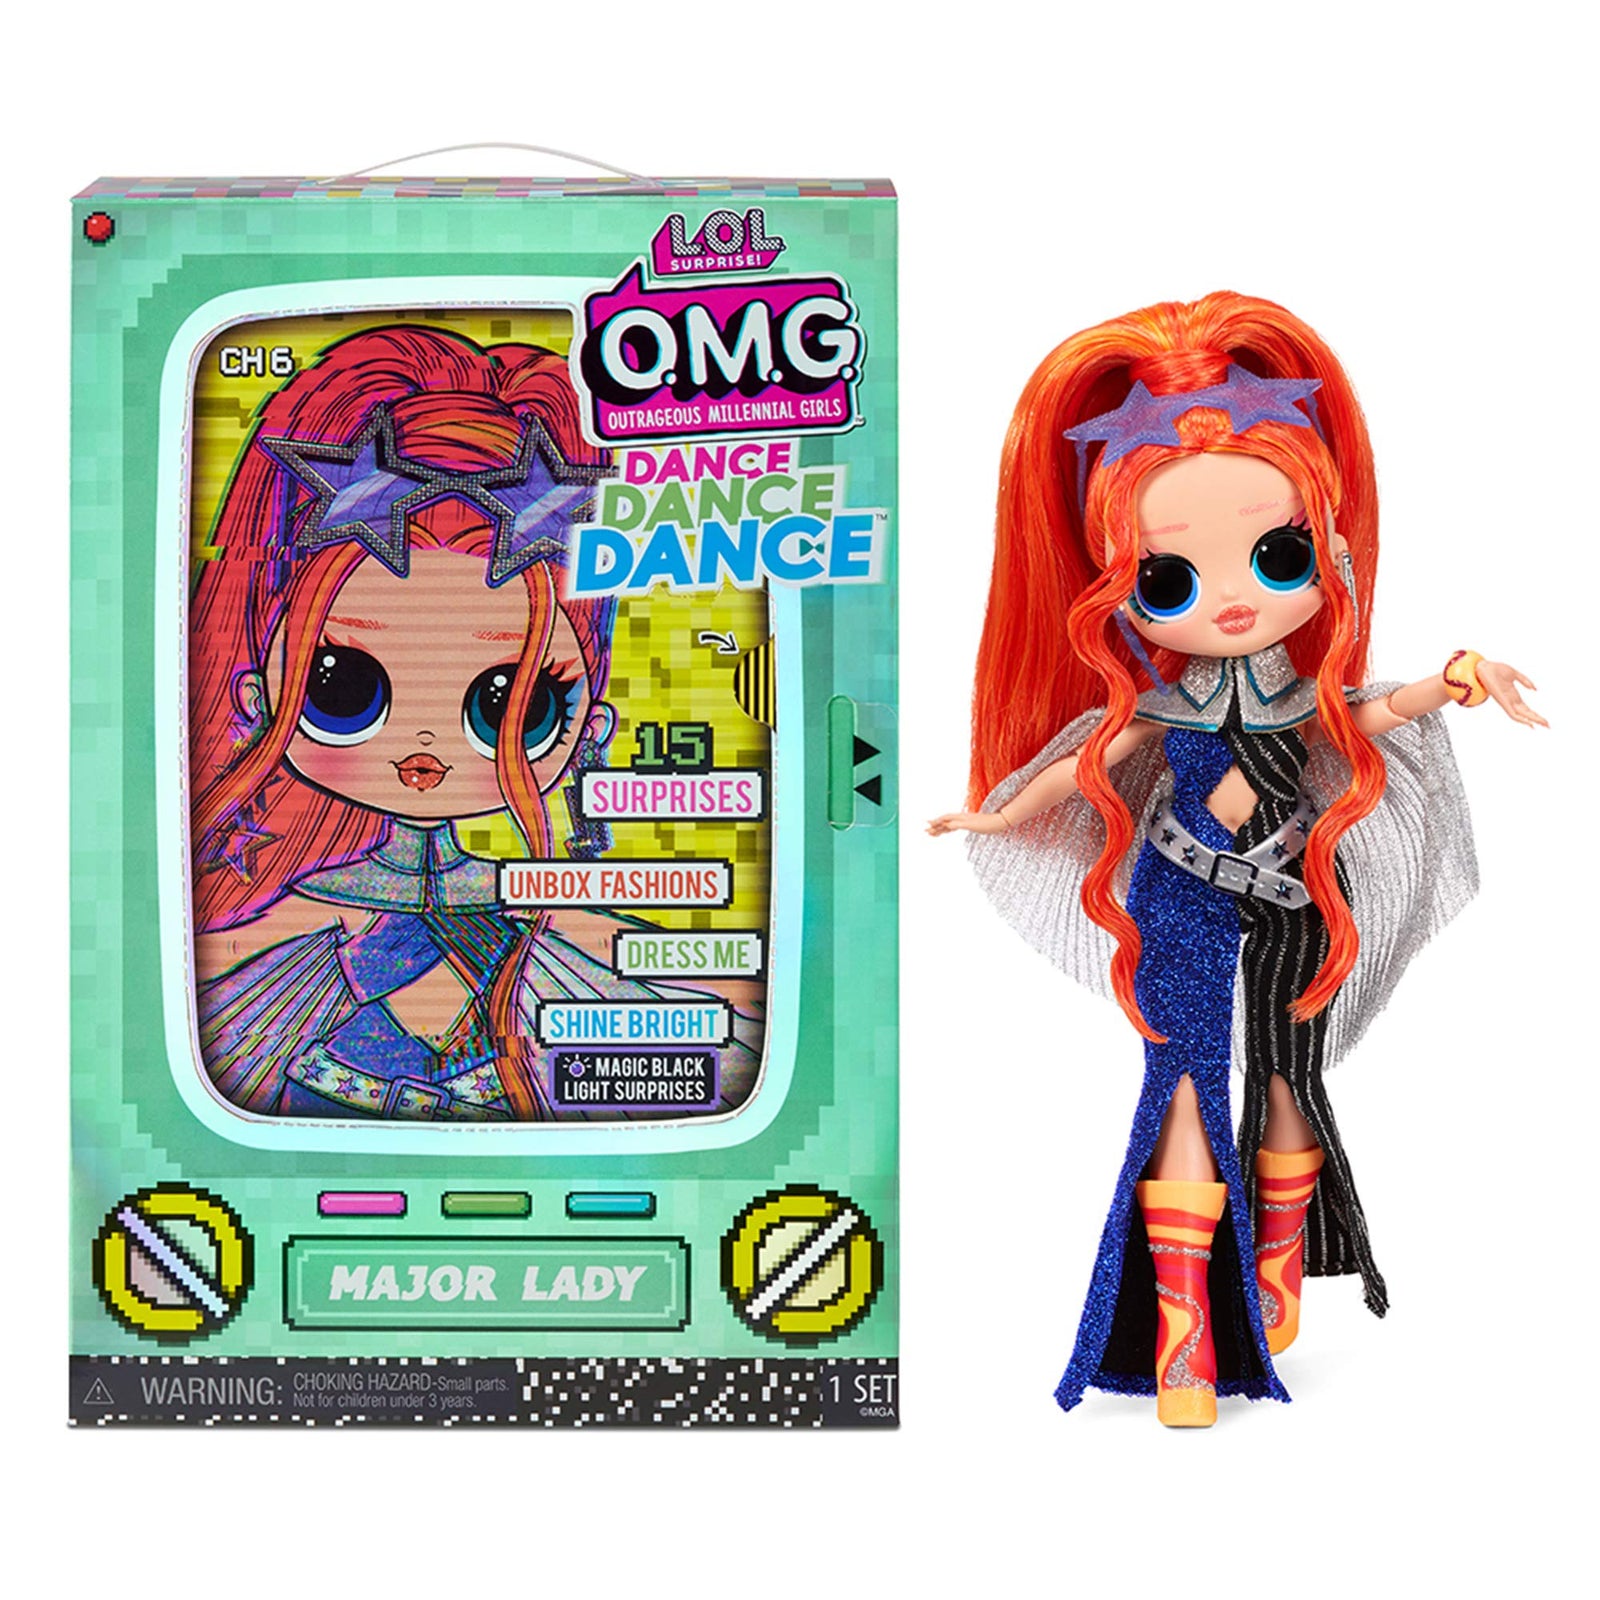 LOL Surprise OMG Dance Dance Dance Major Lady Fashion Doll with 15 Surprises Including Magic Black Light, Shoes, Hair Brush, Doll Stand and TV Package - A Great Gift for Girls Ages 4+